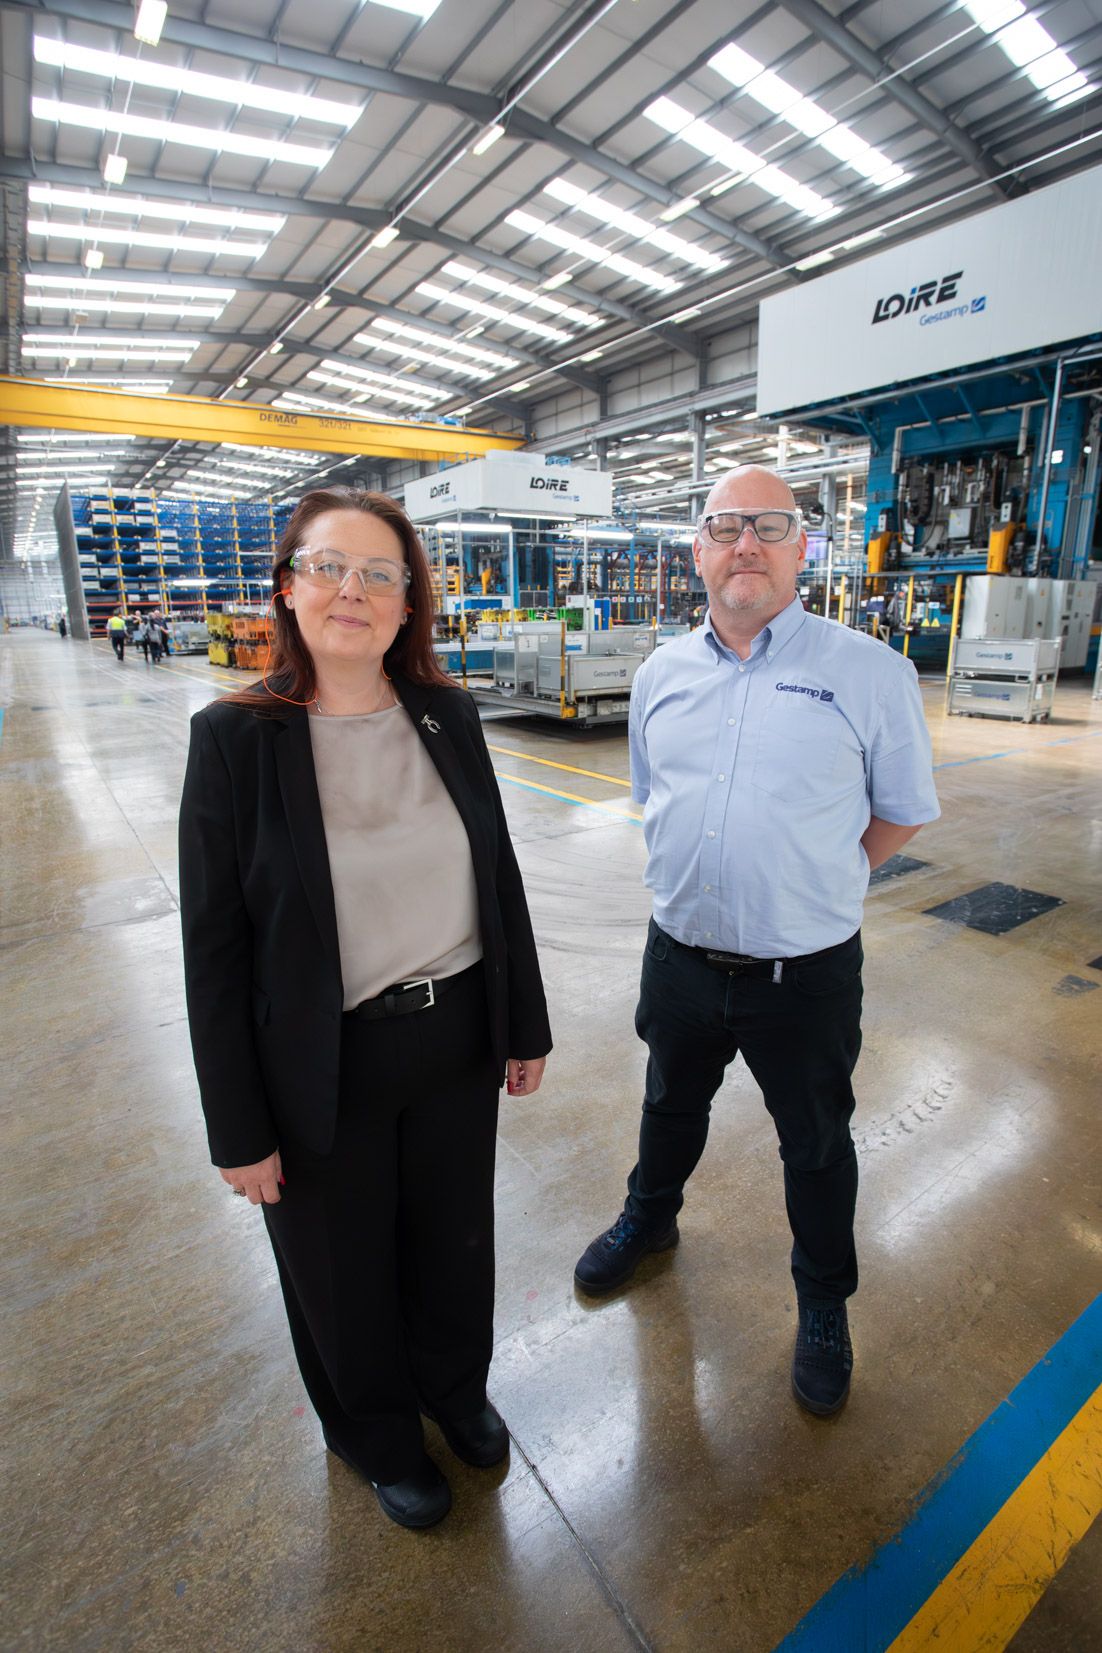 Gestamp and In-Comm launch new training centre